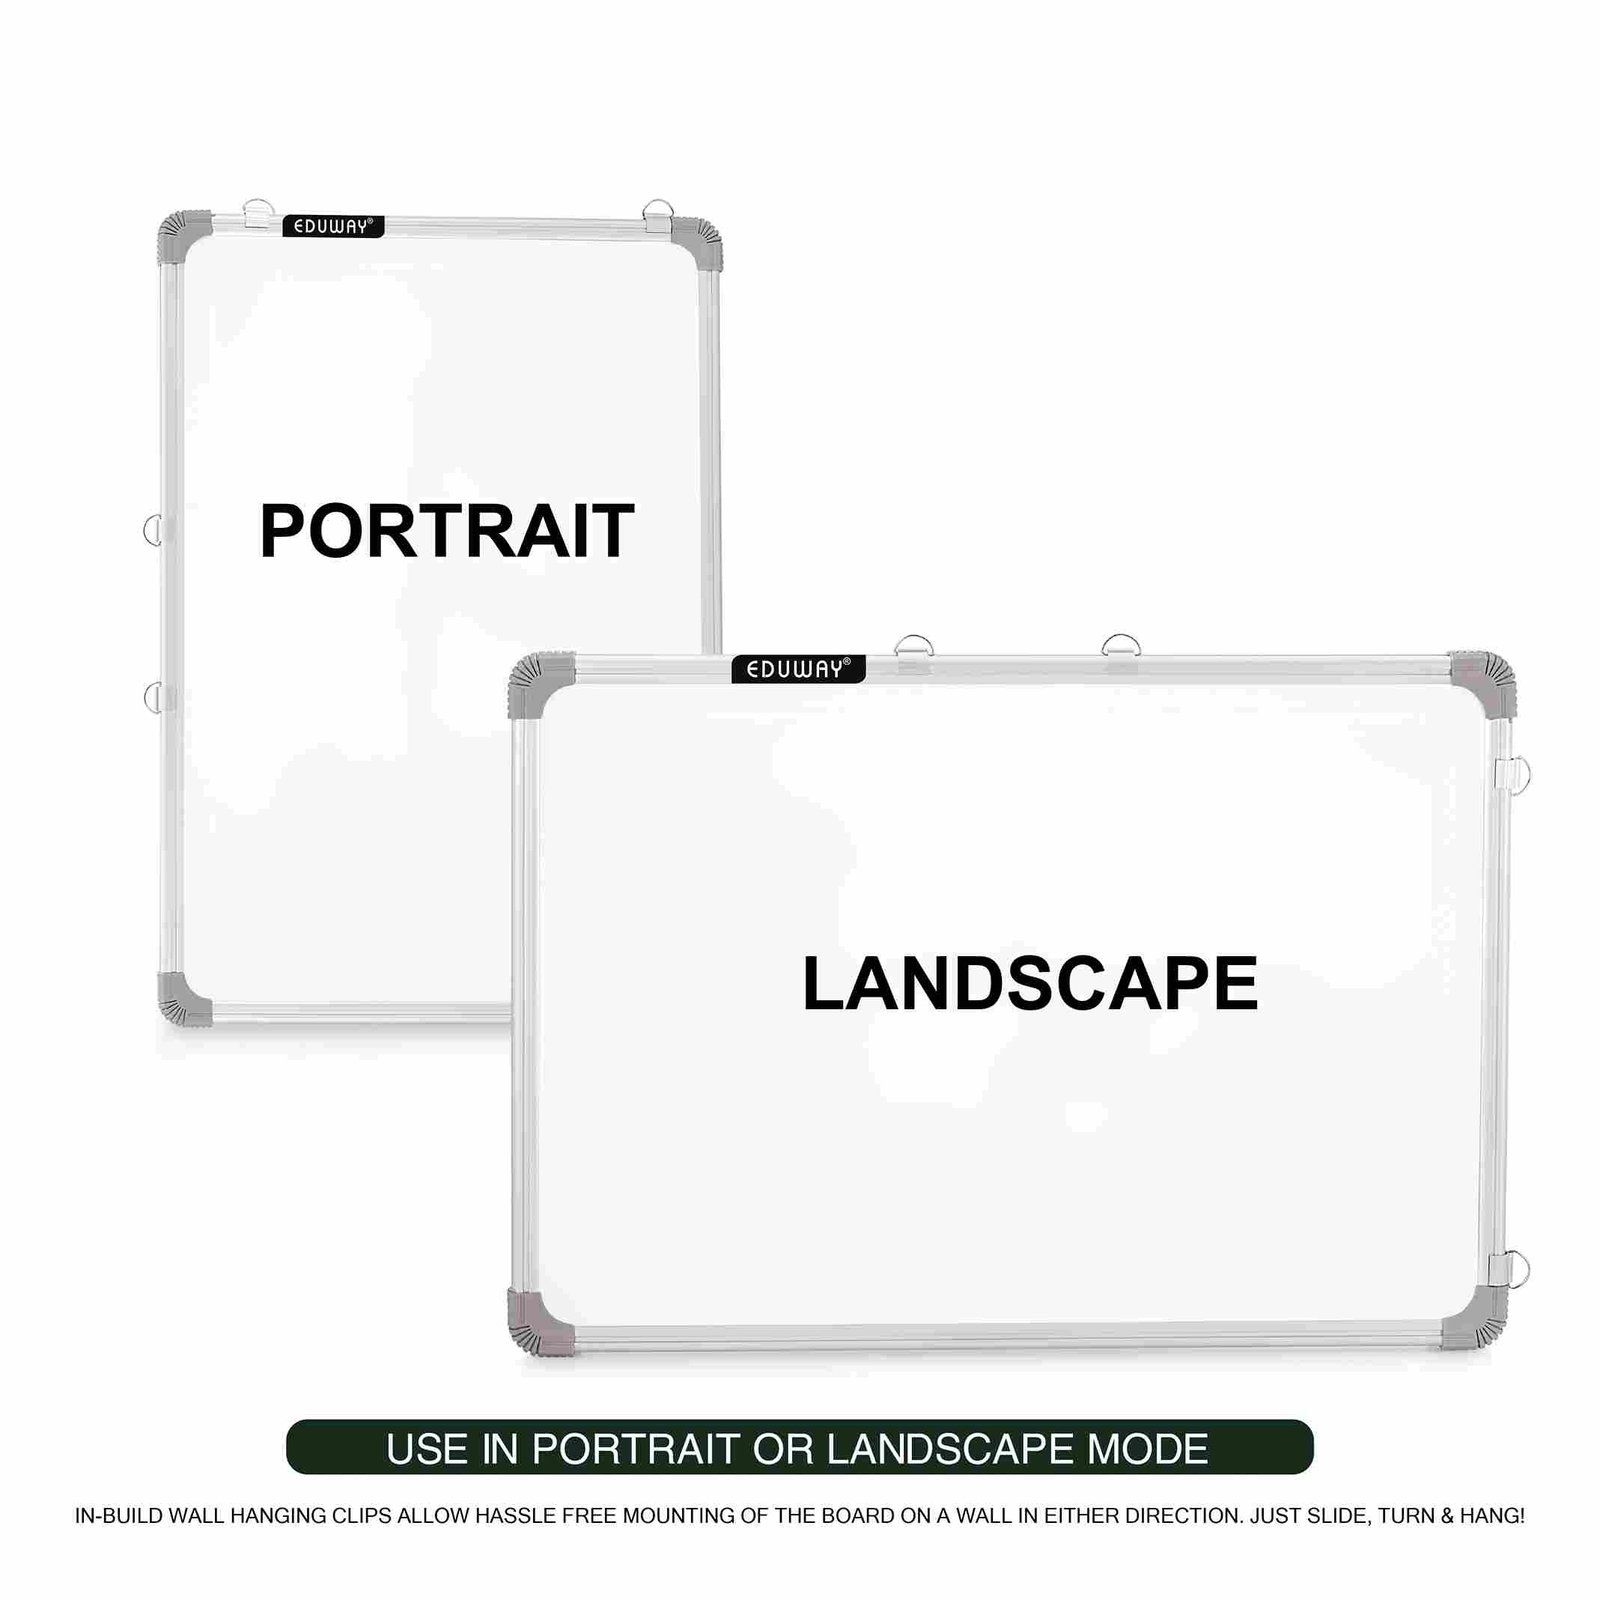 chalkboard green surface non magnetic back side white surface portrait and landscape